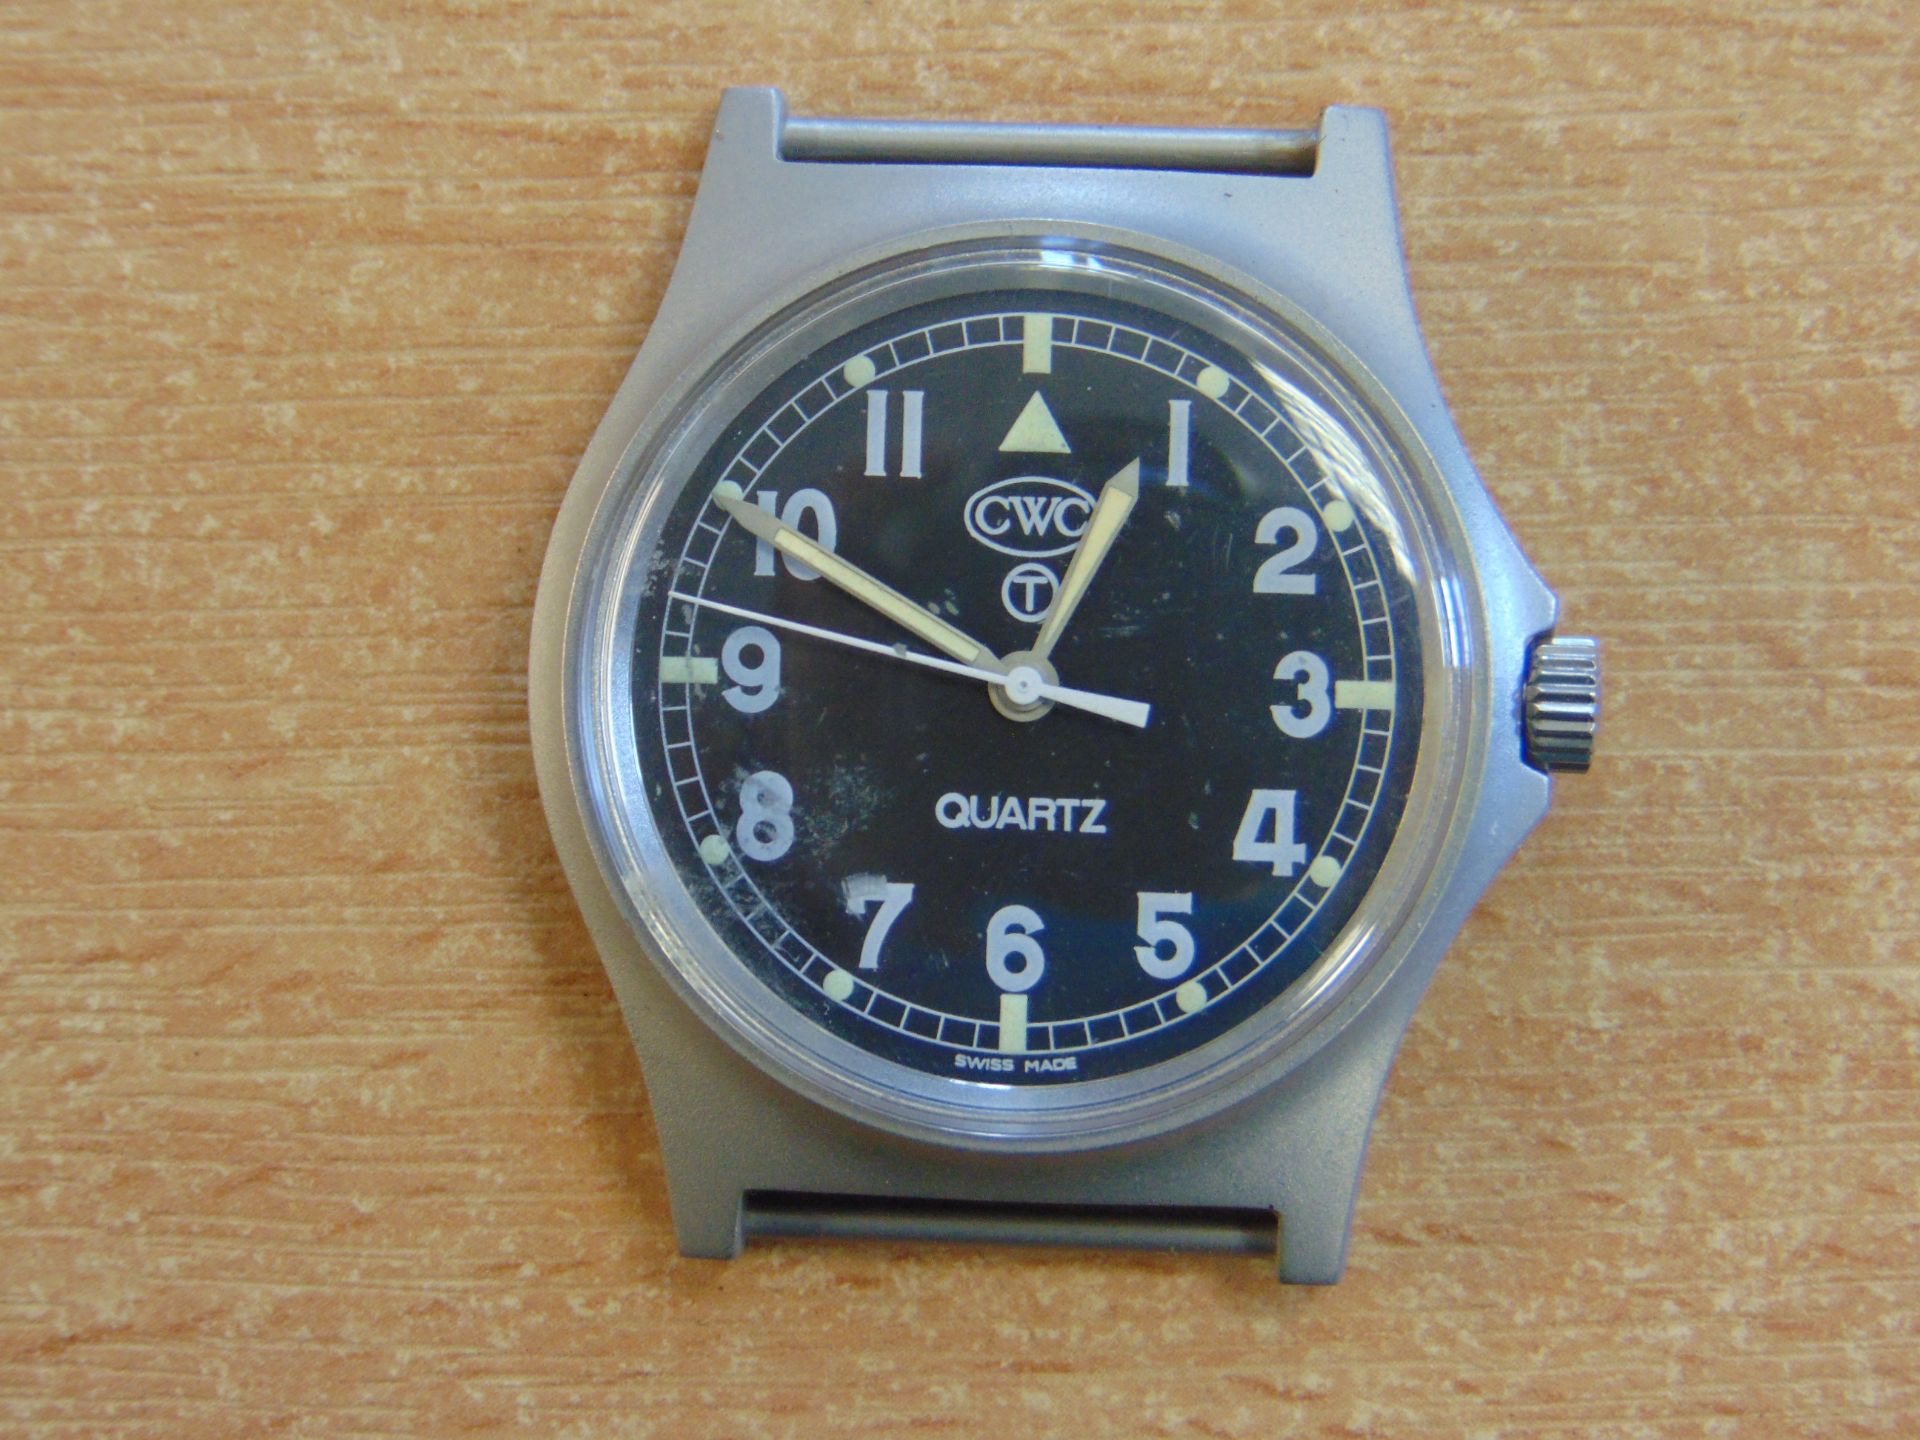 UNIQUE CWC 0552 ROYAL MARINES/ ROYAL NAVY ISSUE SERVICE WATCH DATED 1990 ** GULF WAR** SN.66054 - Image 5 of 9